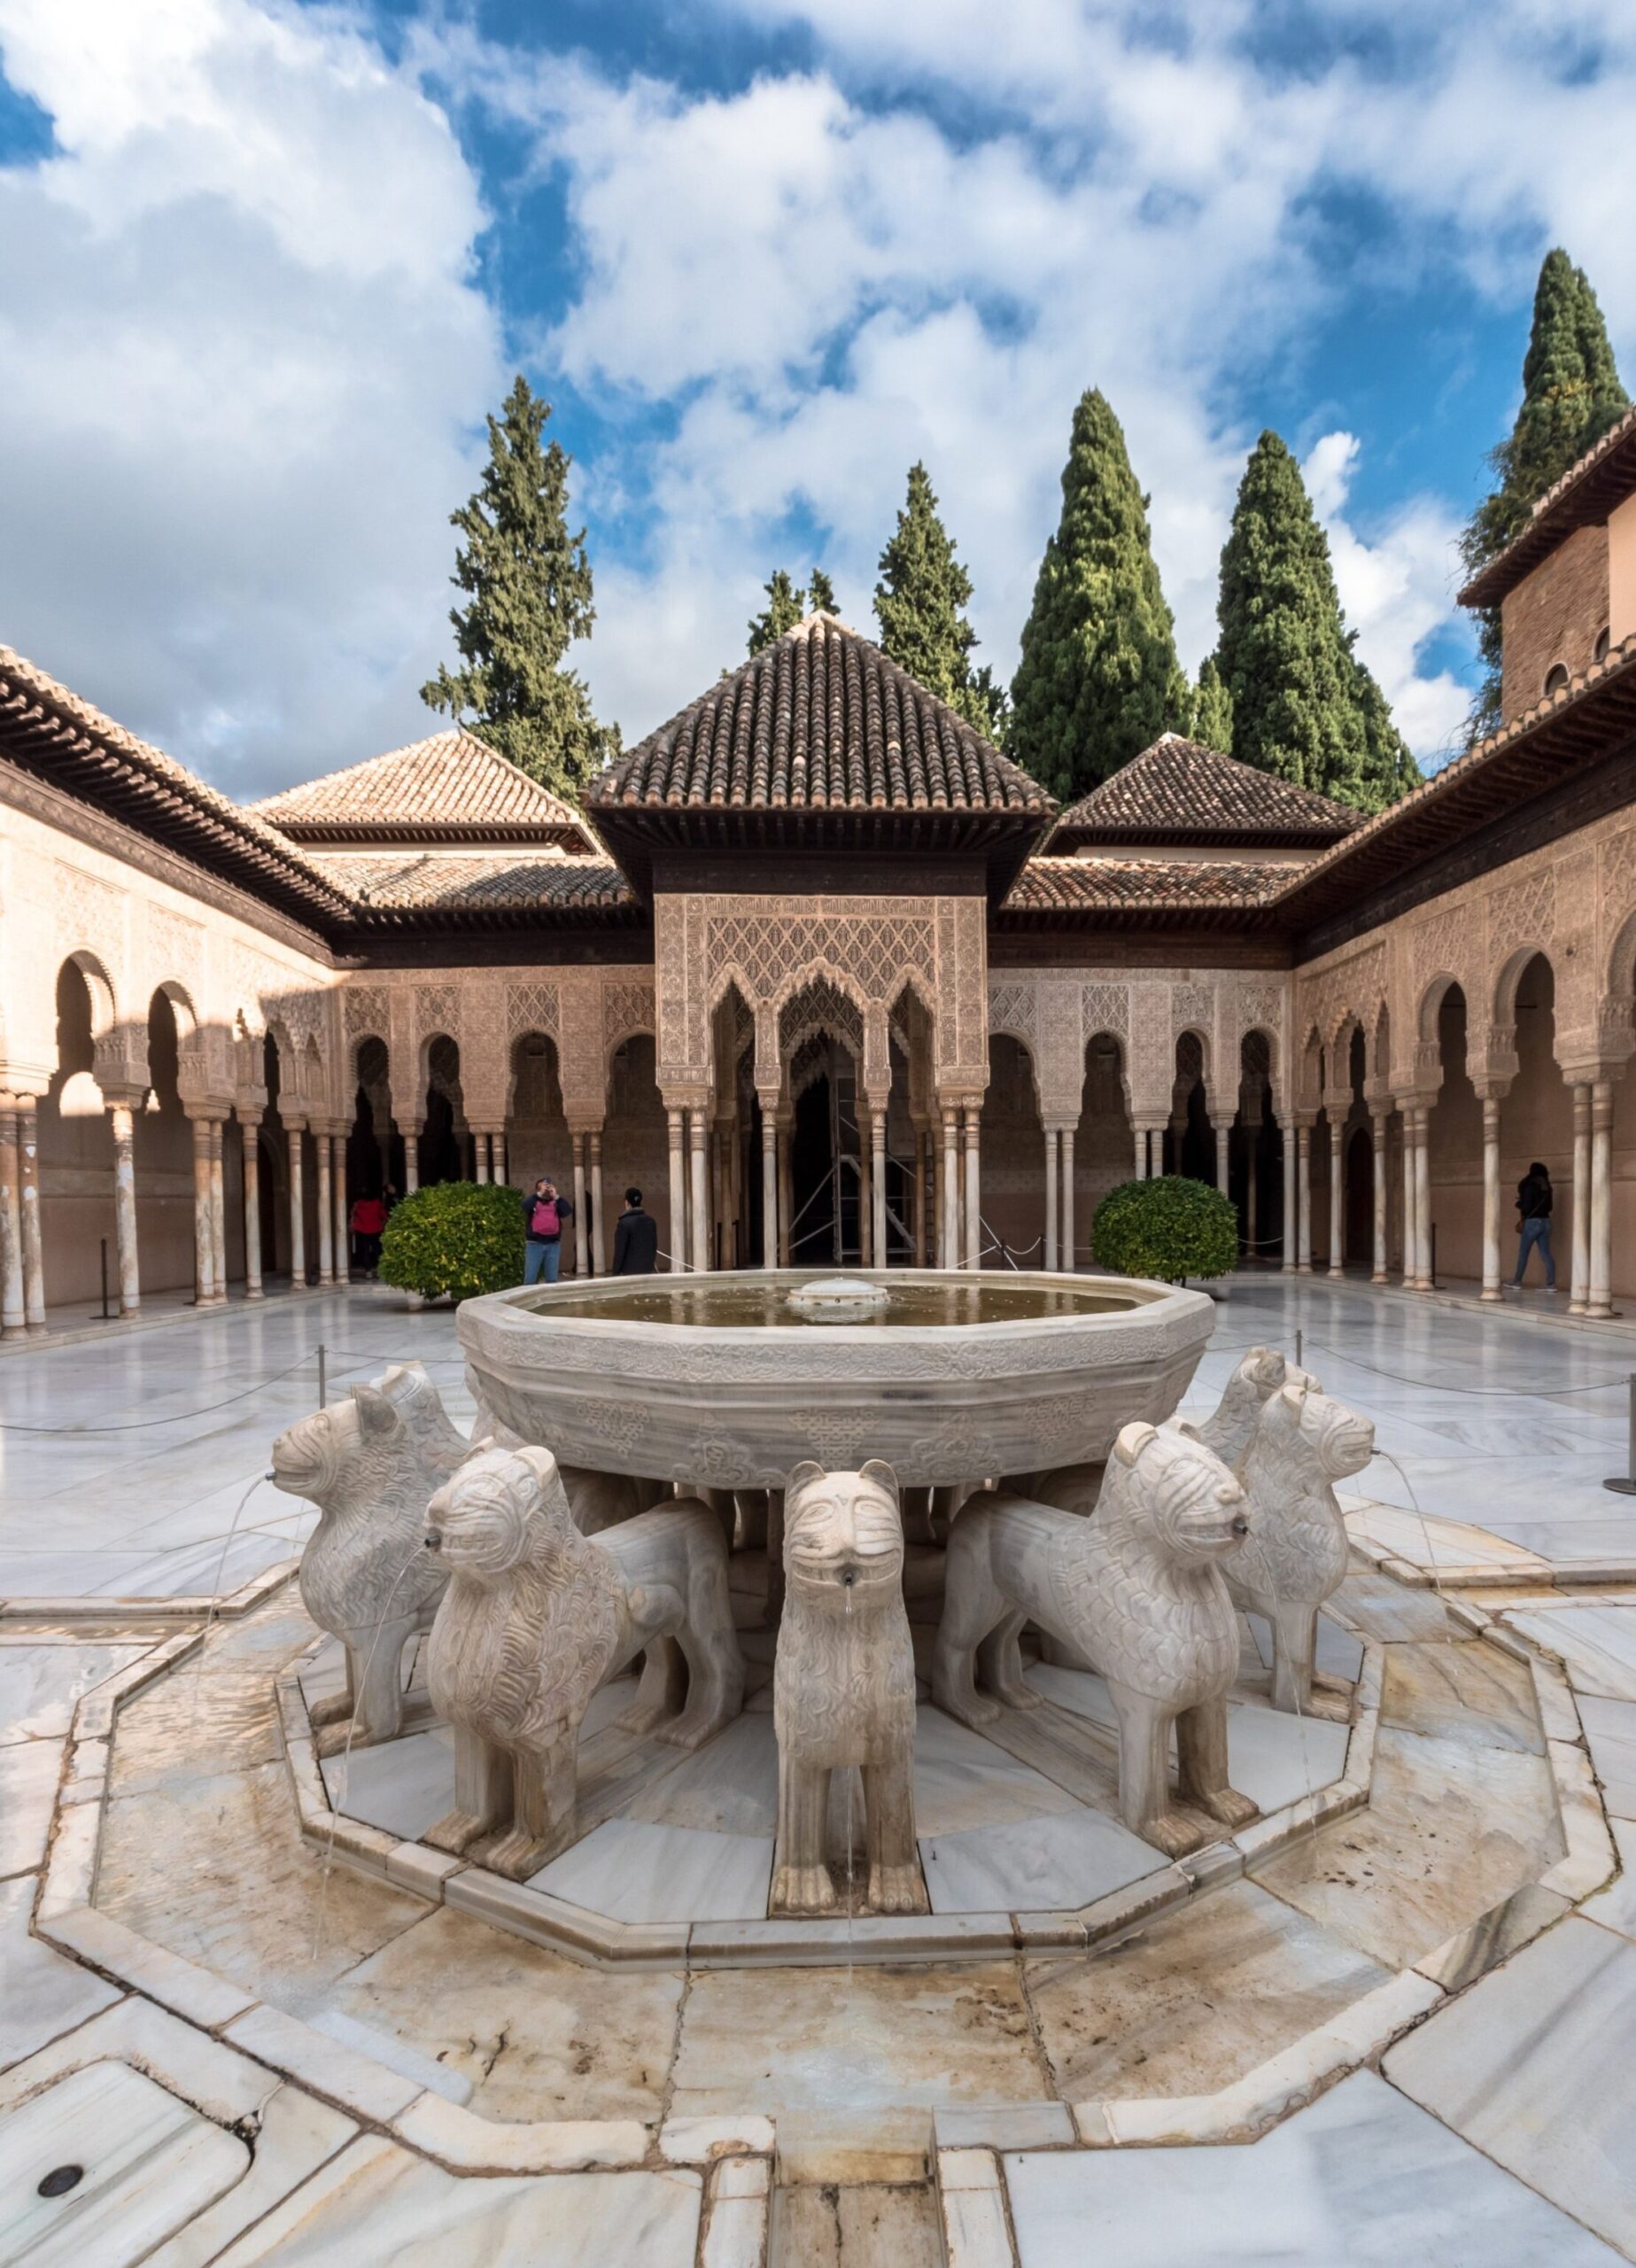 The Lion Fountain in the Palace of the Lions in the Alhambra